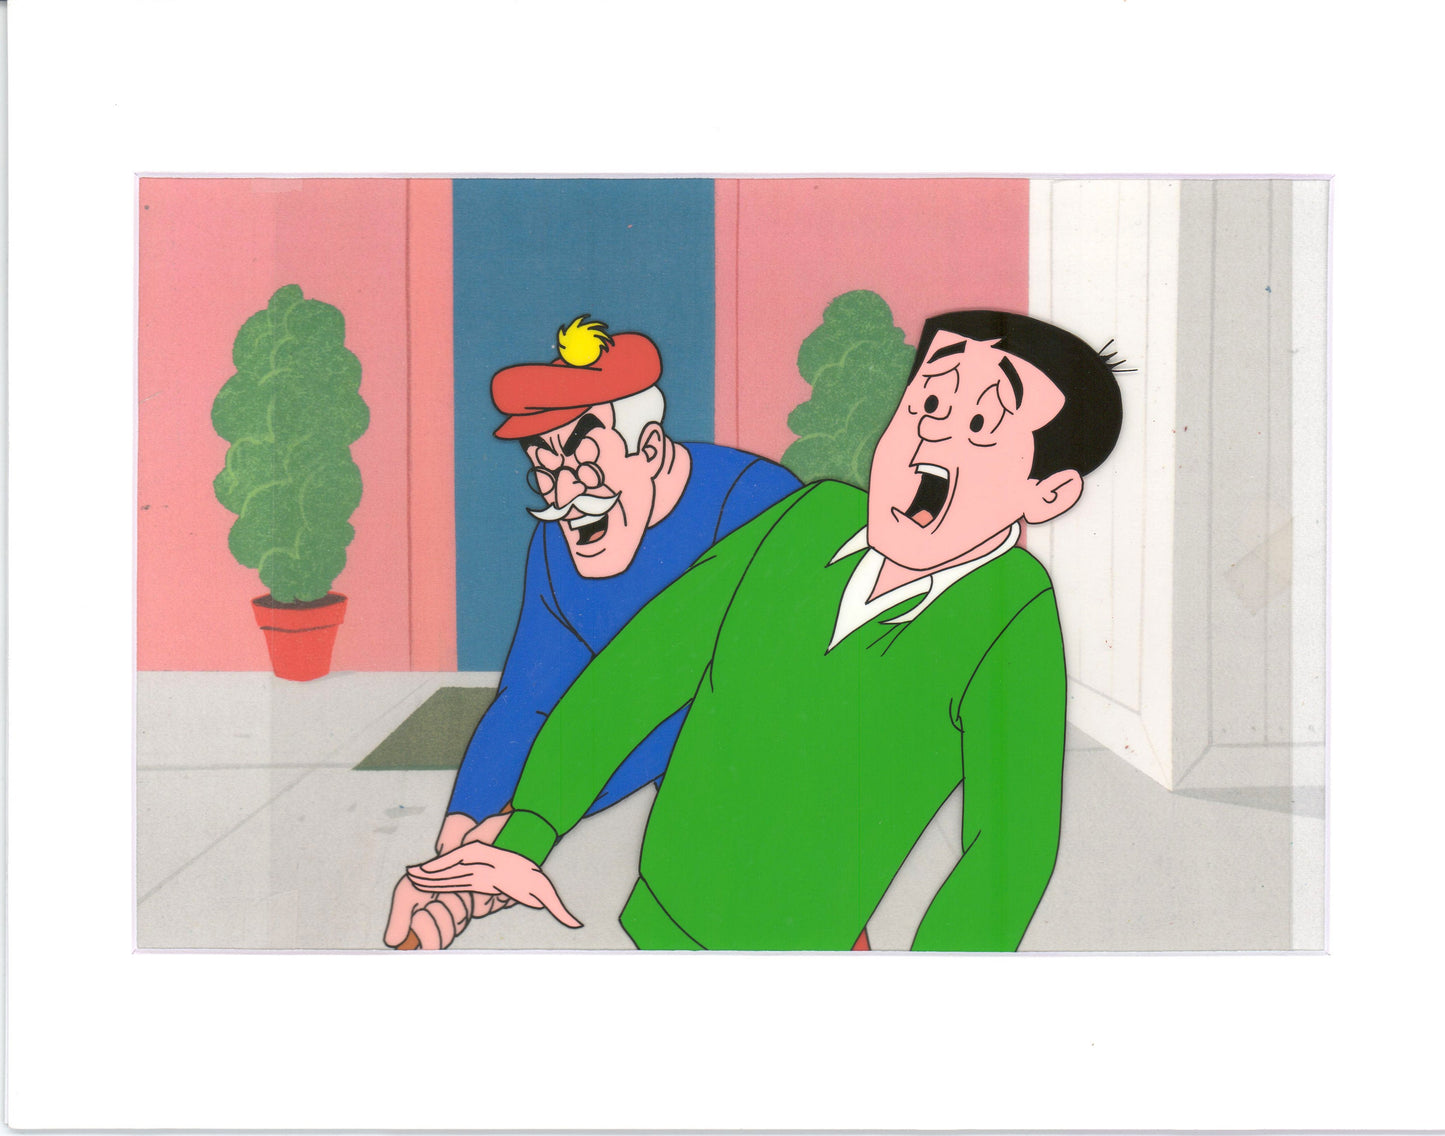 Archie Production Animation Art Cel Setup from Filmation 1968-1969 b2010